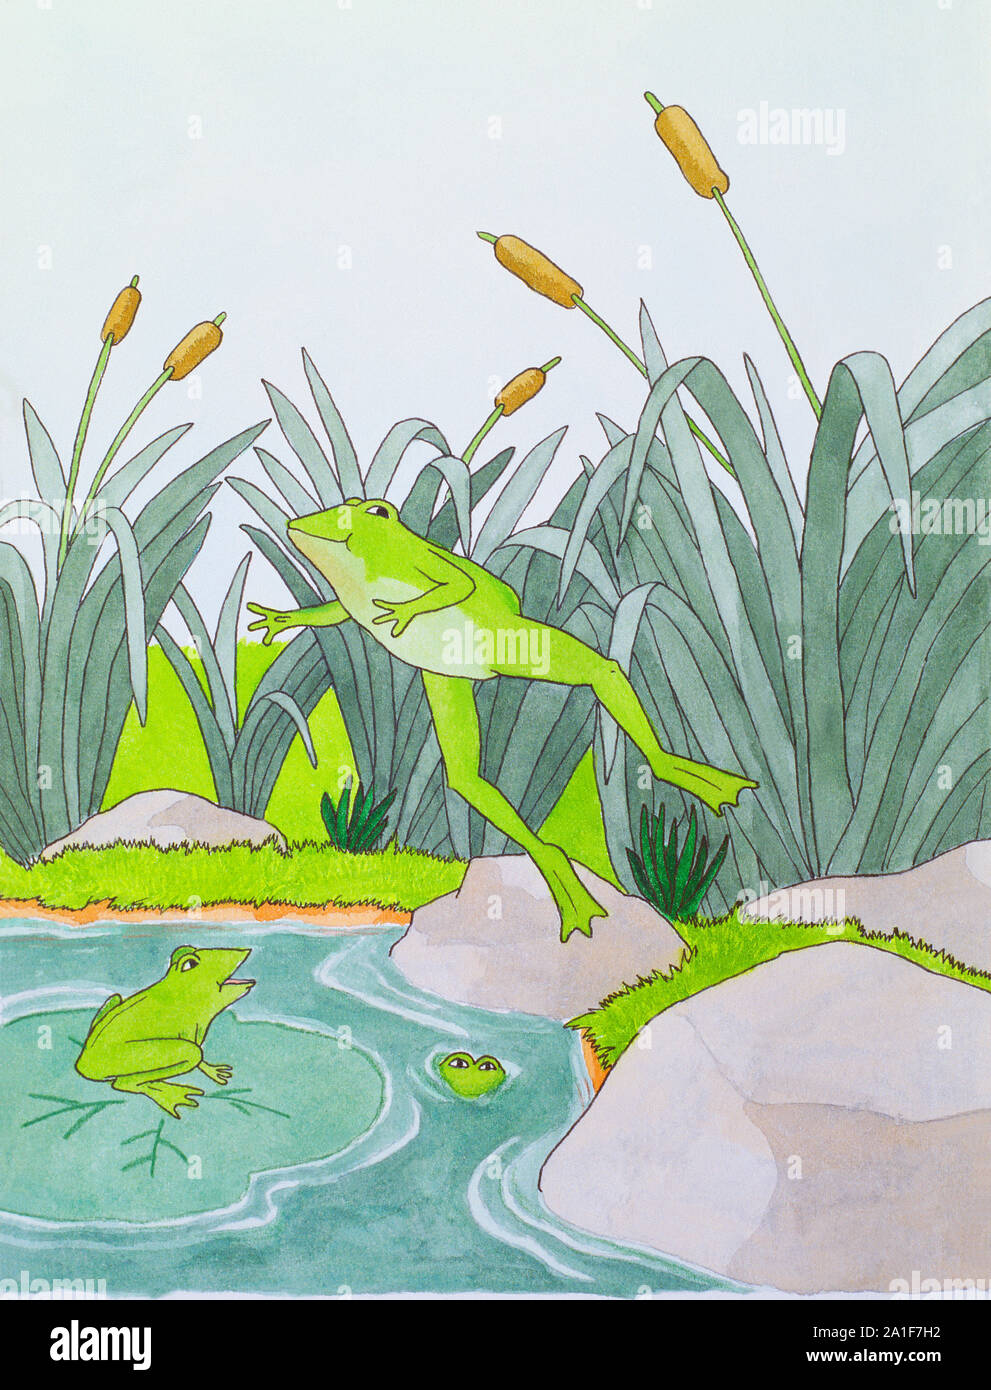 Frogs in a pool. Illustration. Stock Photo